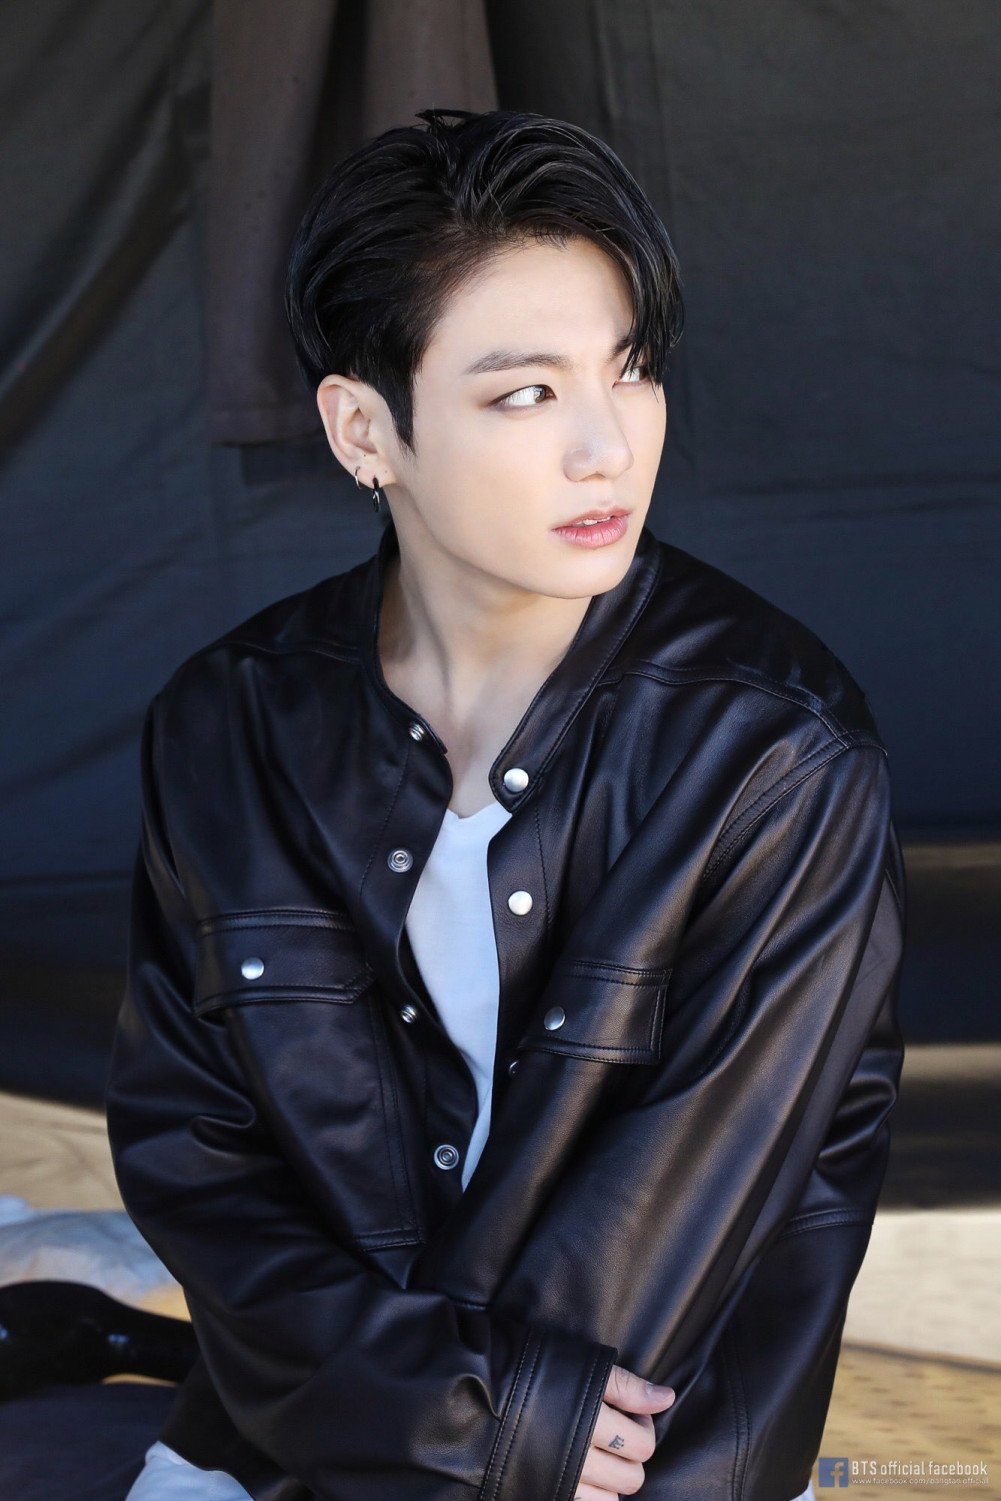 Have You Seen These Rare And Unseen Photoshoots Of BTS Jungkook Yet